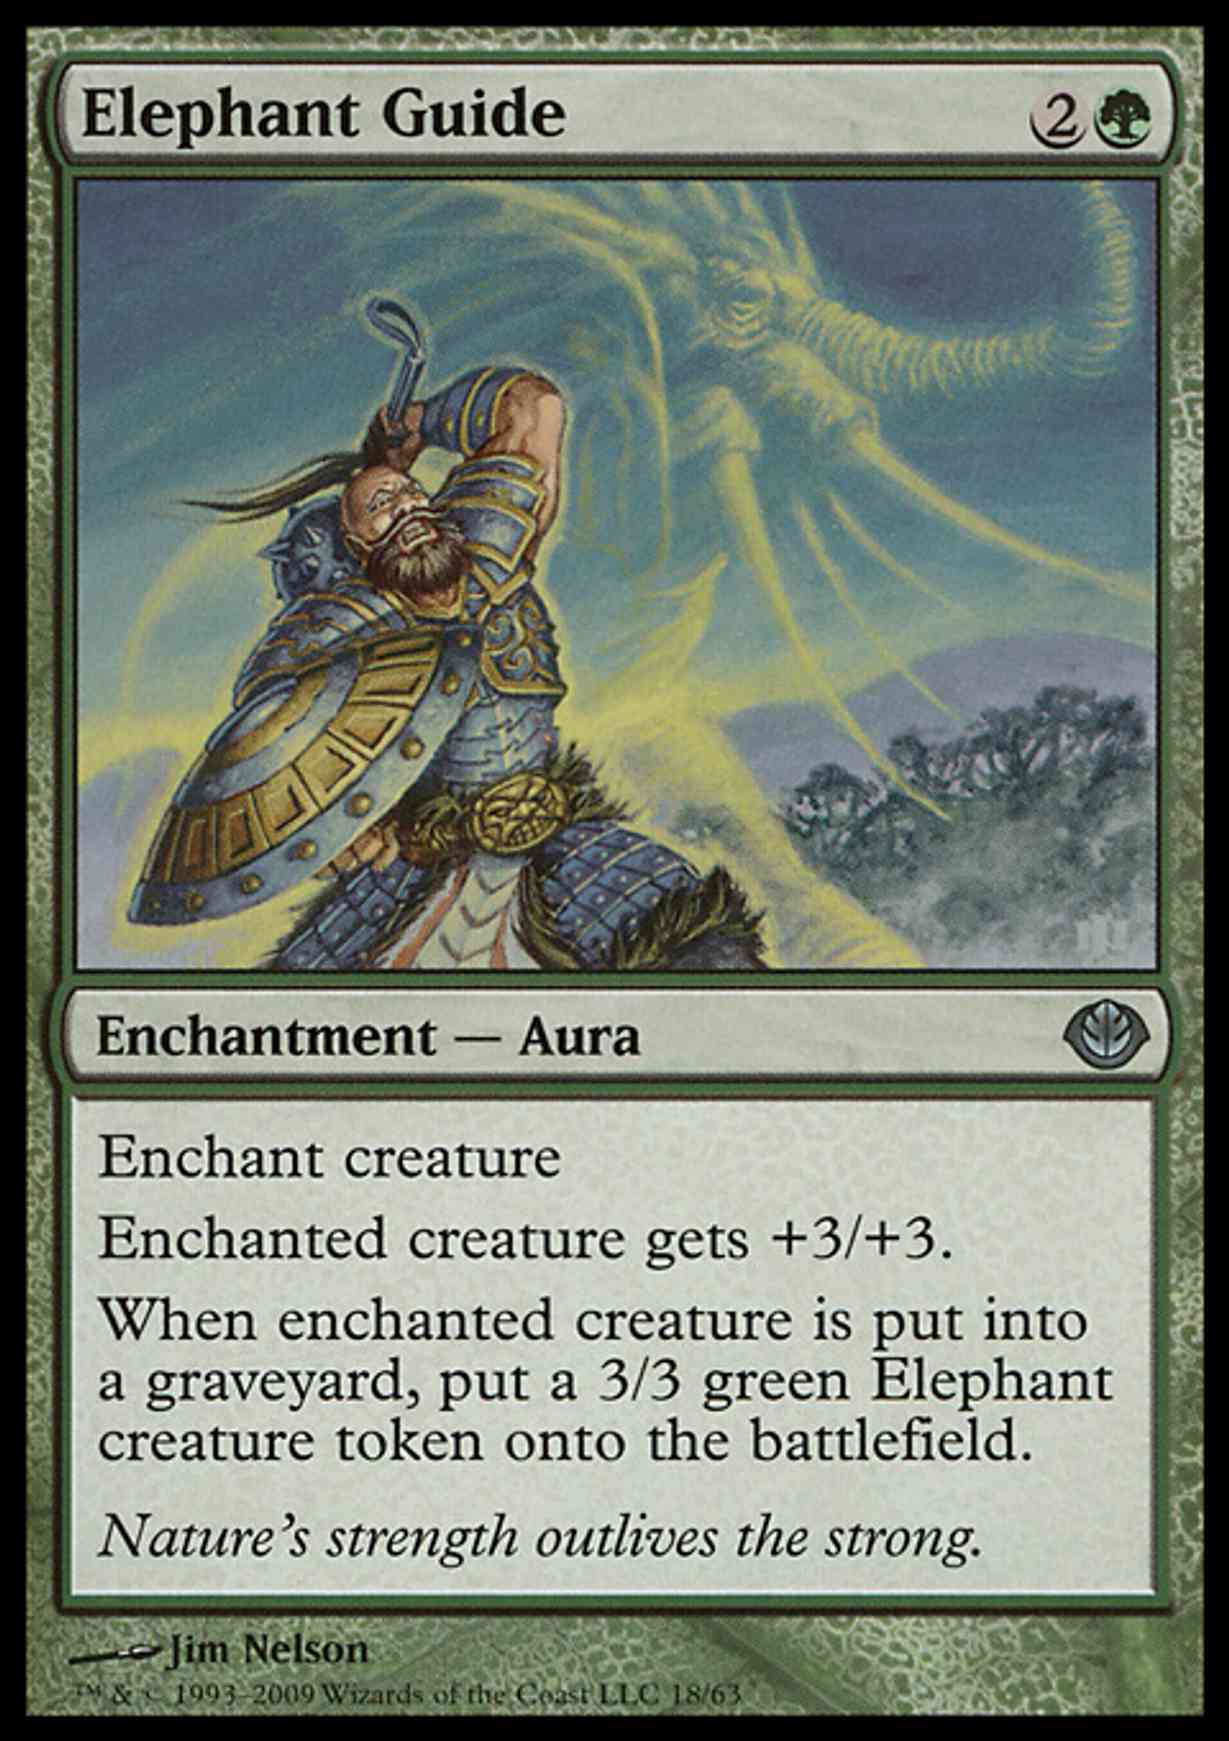 Elephant Guide magic card front